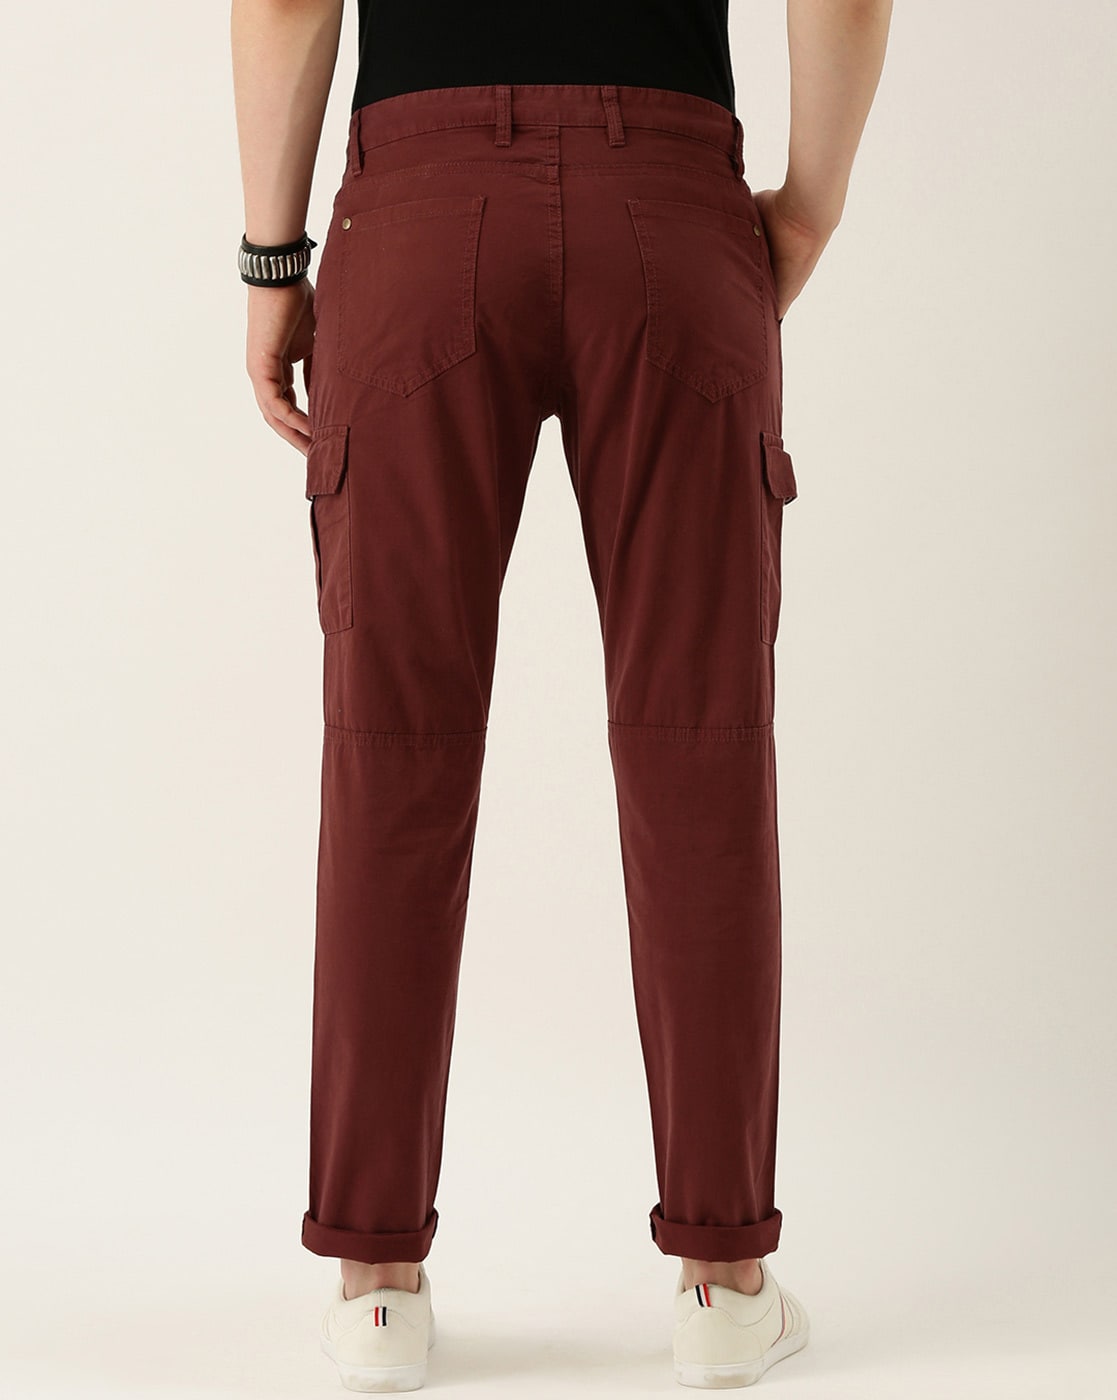 Buy Maroon Super Slim Fit Knitted Stretch Jeans Online at Muftijeans